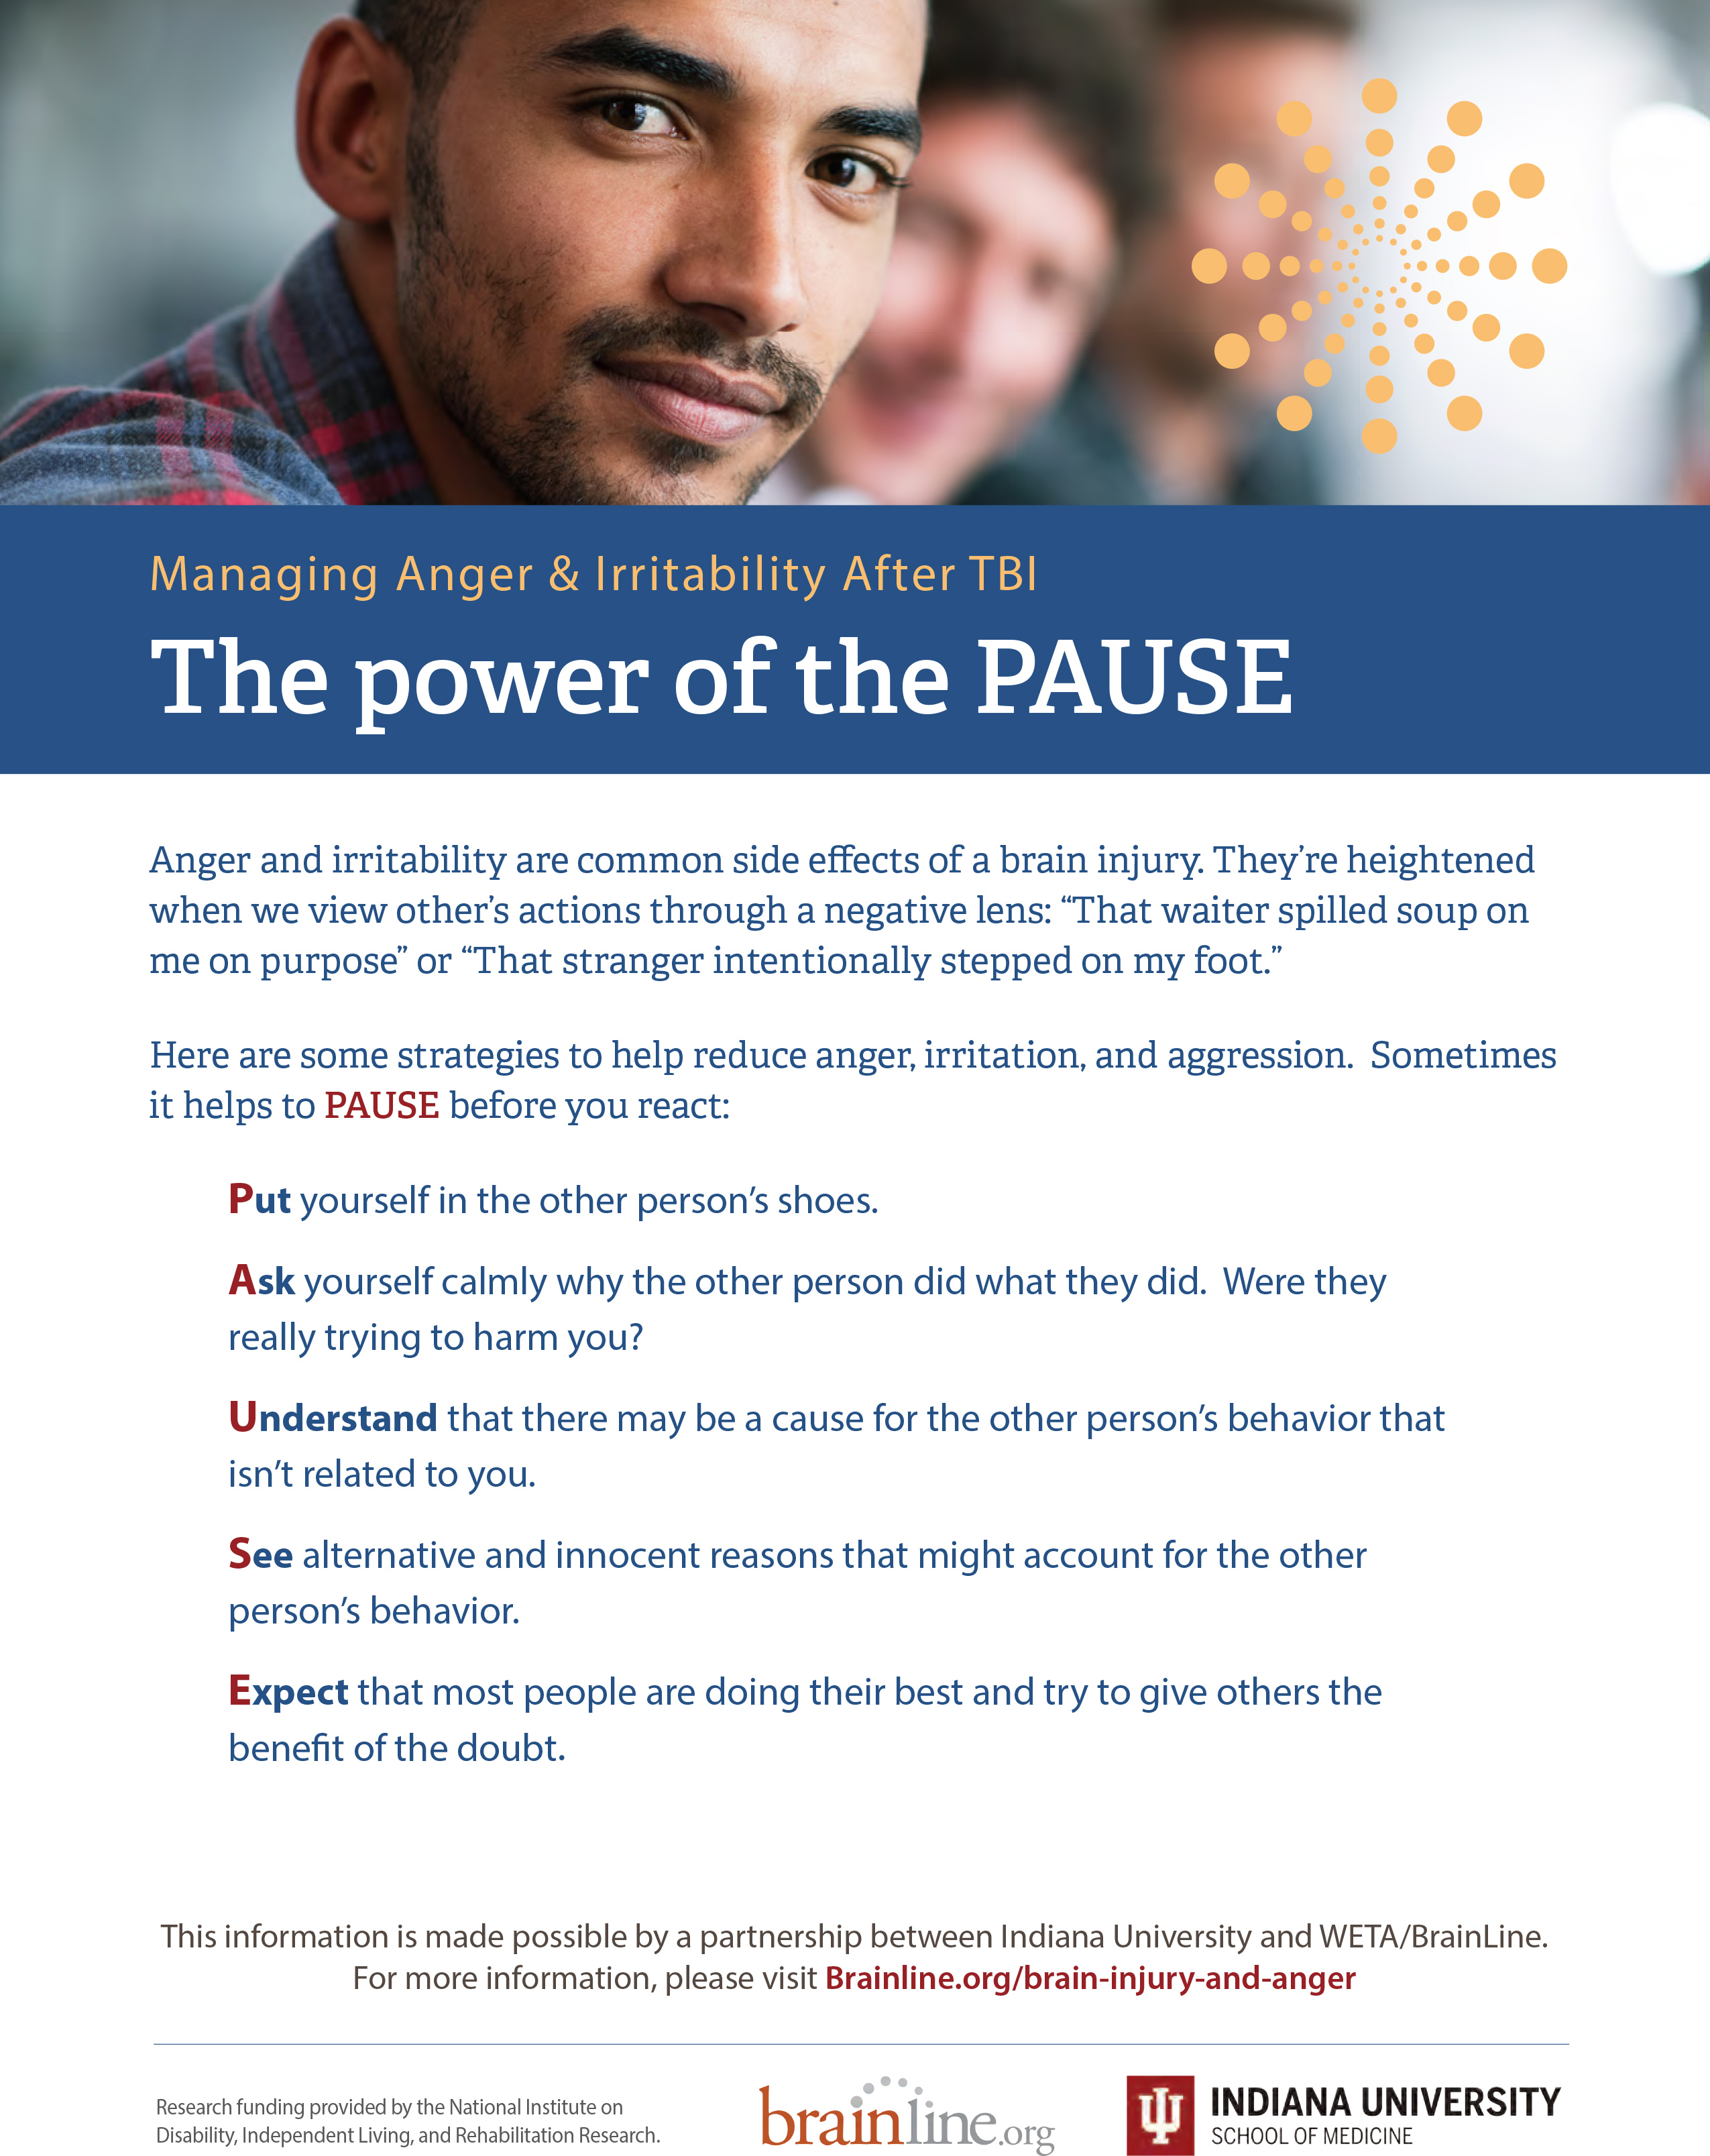 PAUSE strategy for anger and irritability after TBI